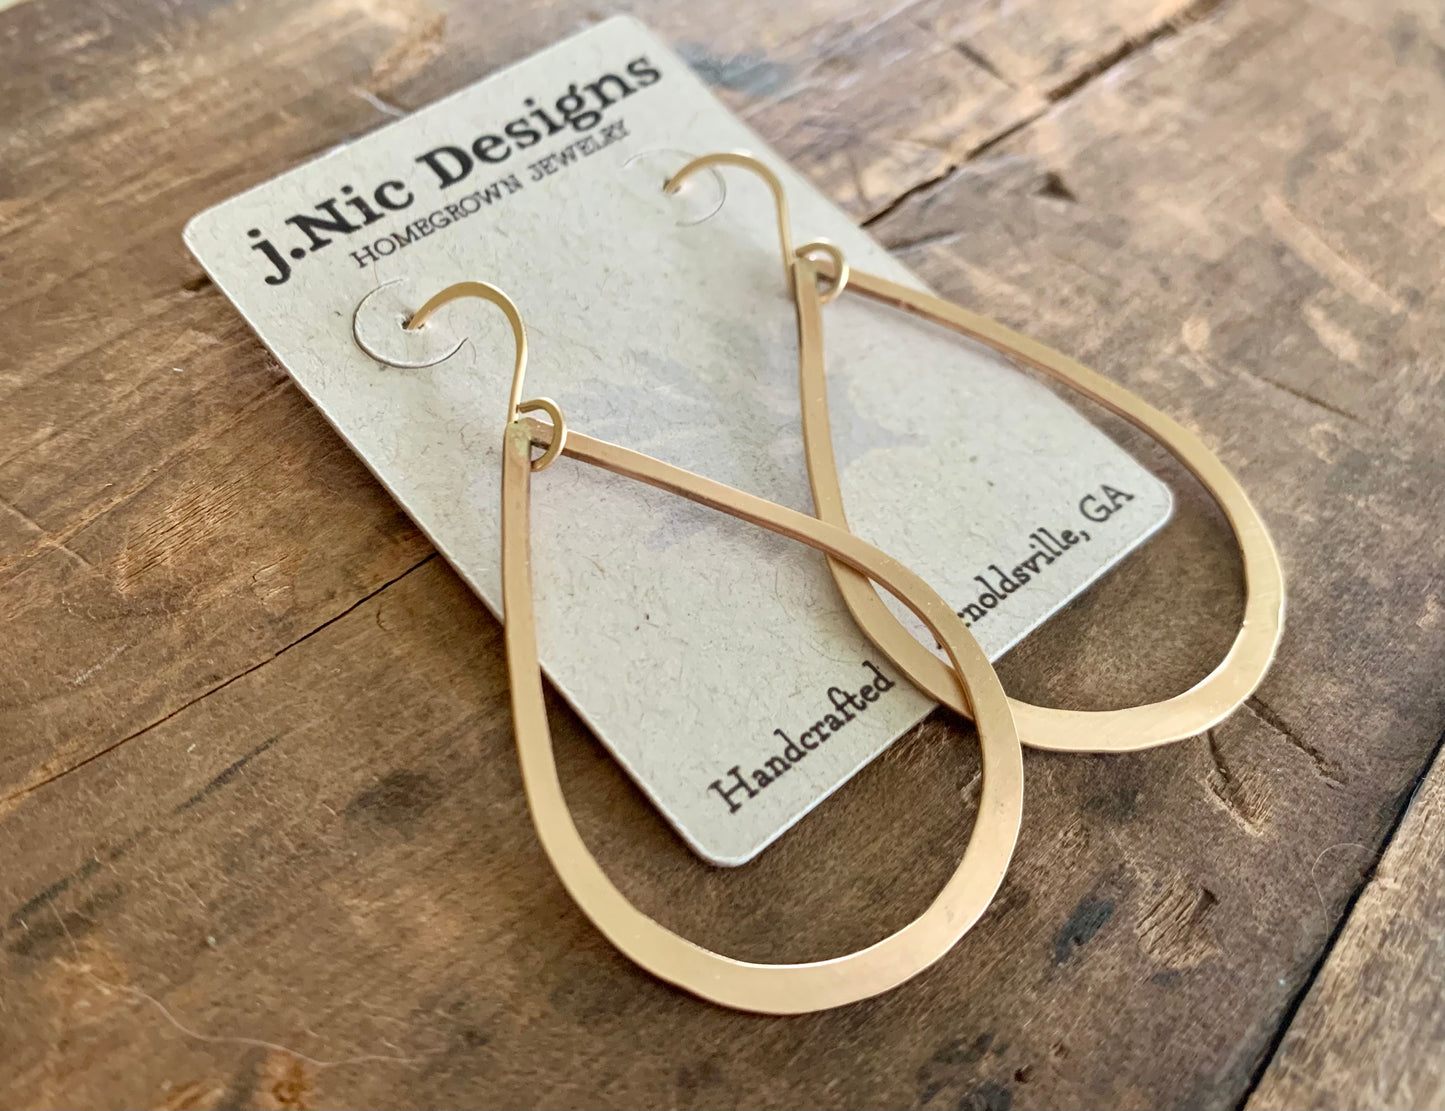 NEW Satin Tears - Handmade. Brushed Matte Goldfill Tear Drop Earrings. Yellow or Rose Goldfill